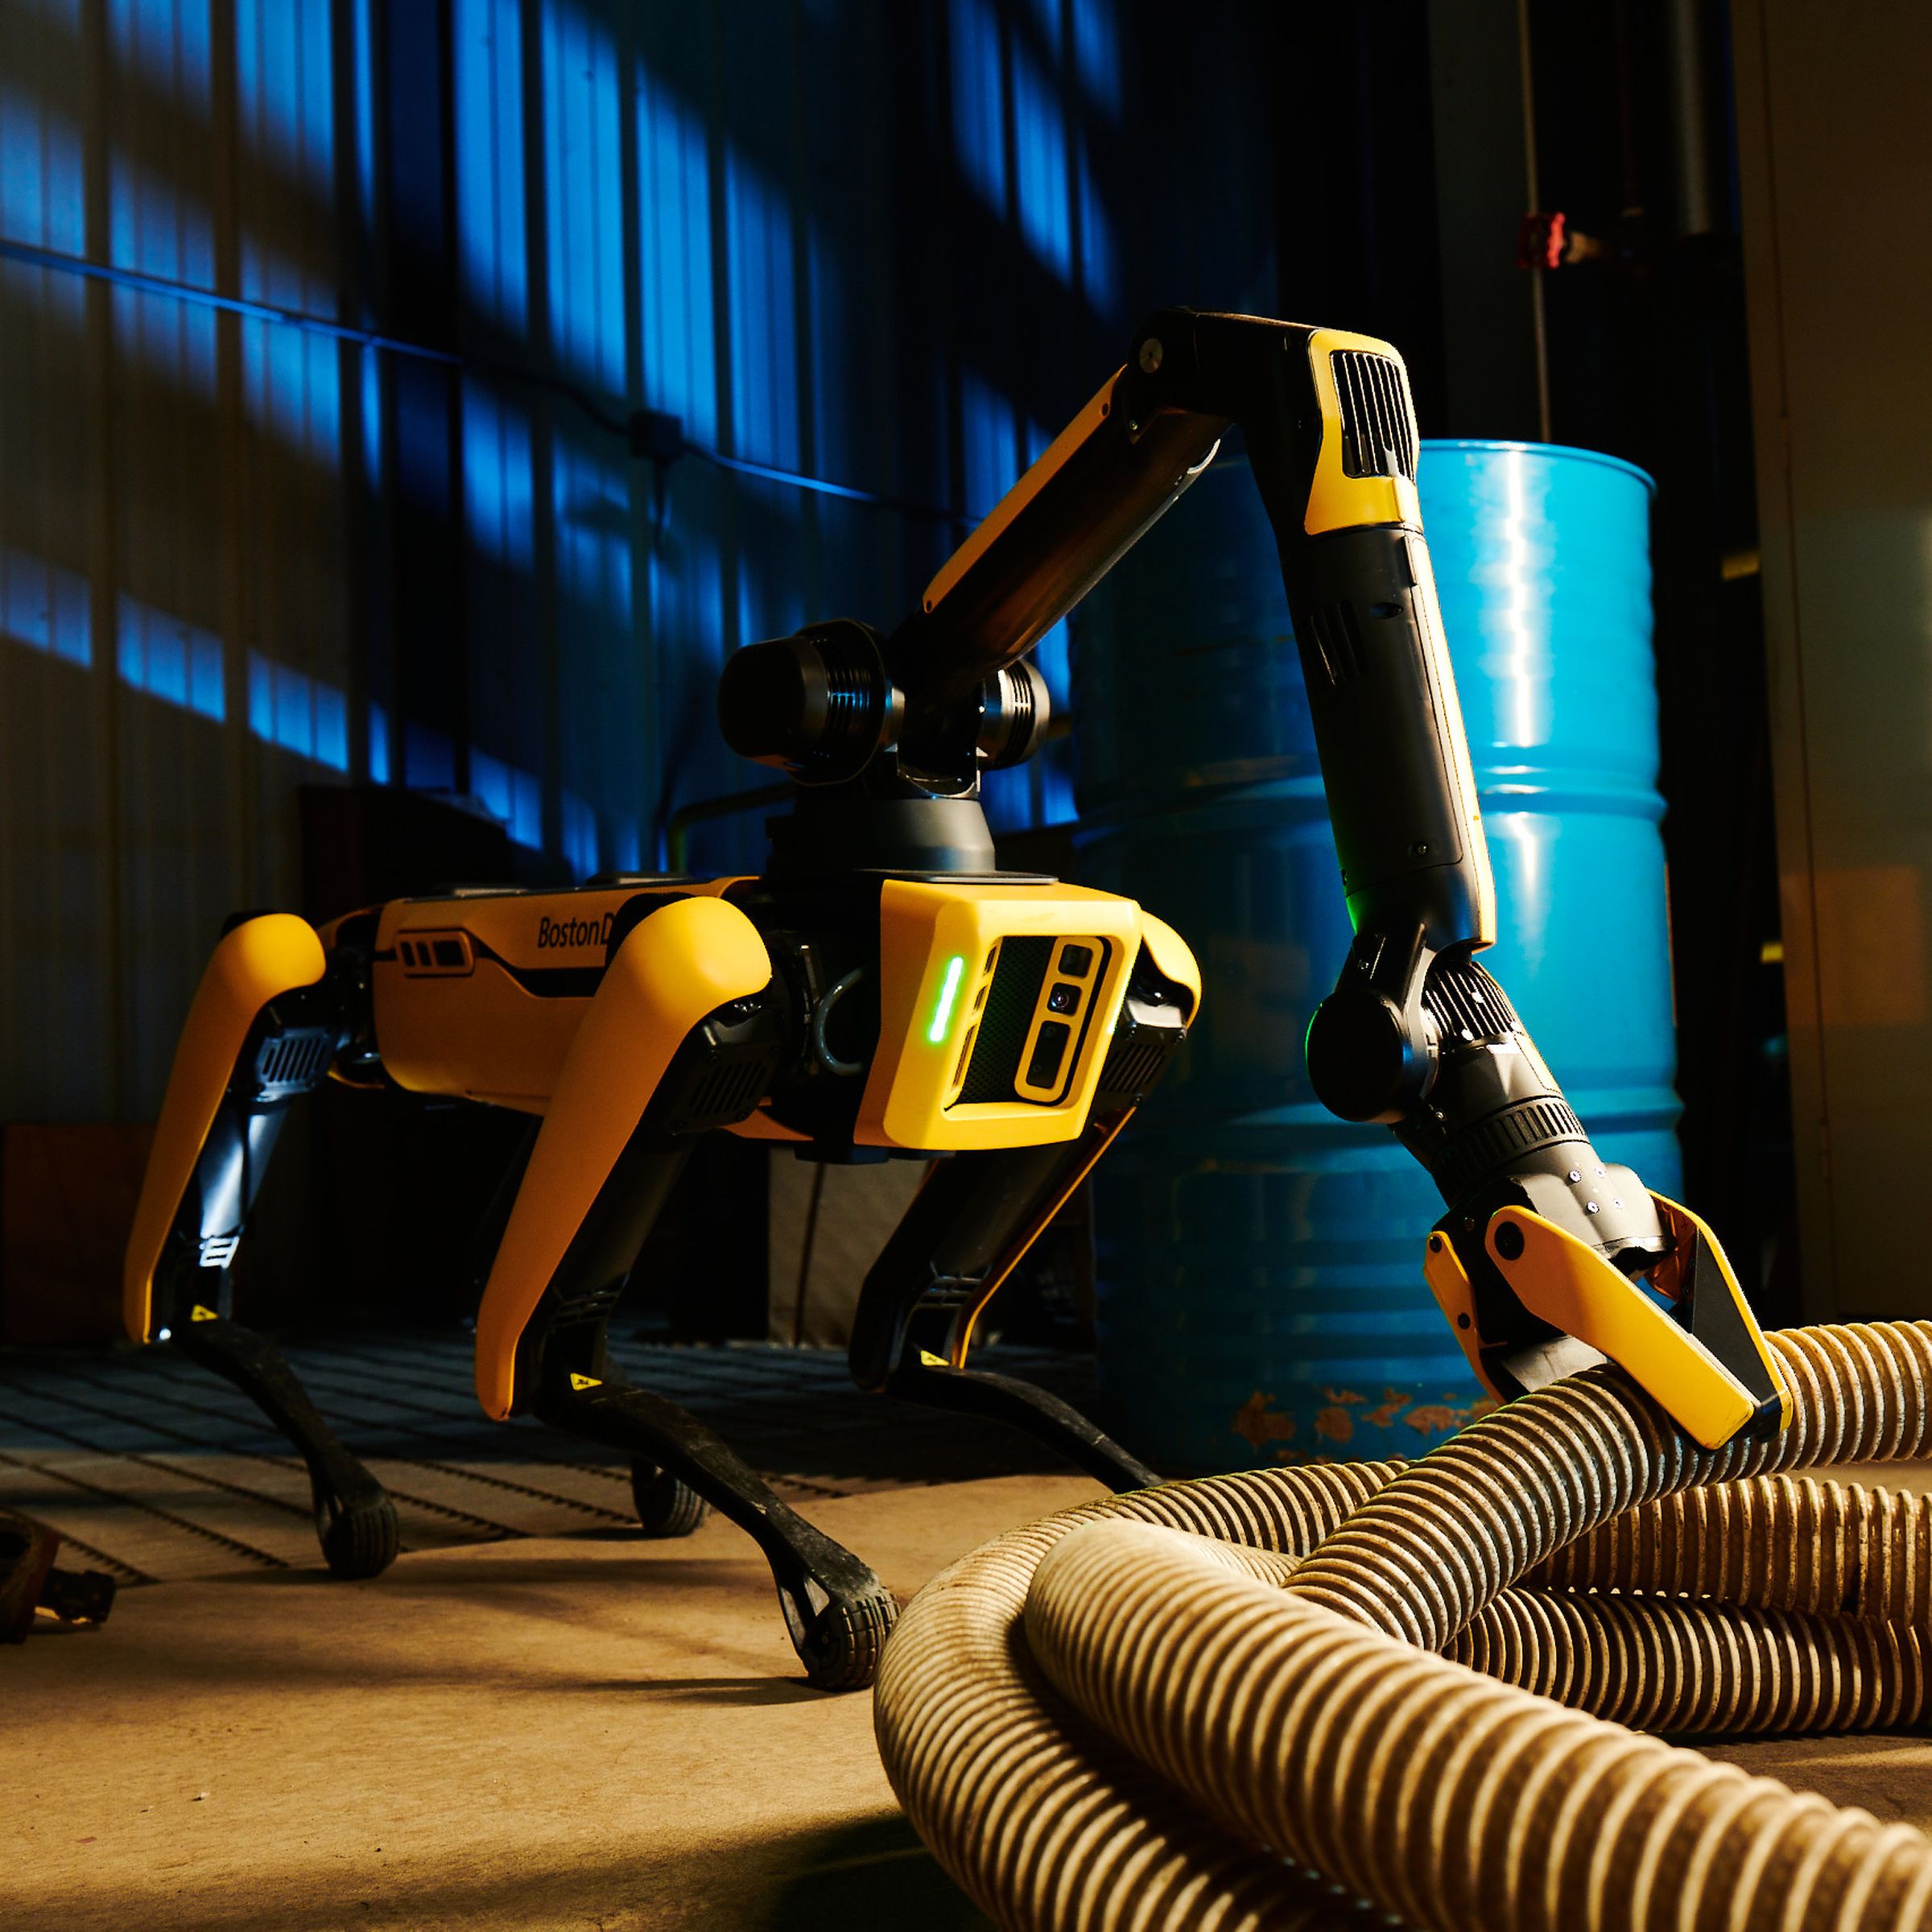 Boston Dynamics will sell an arm to allow the robot to interact with objects in its environment.